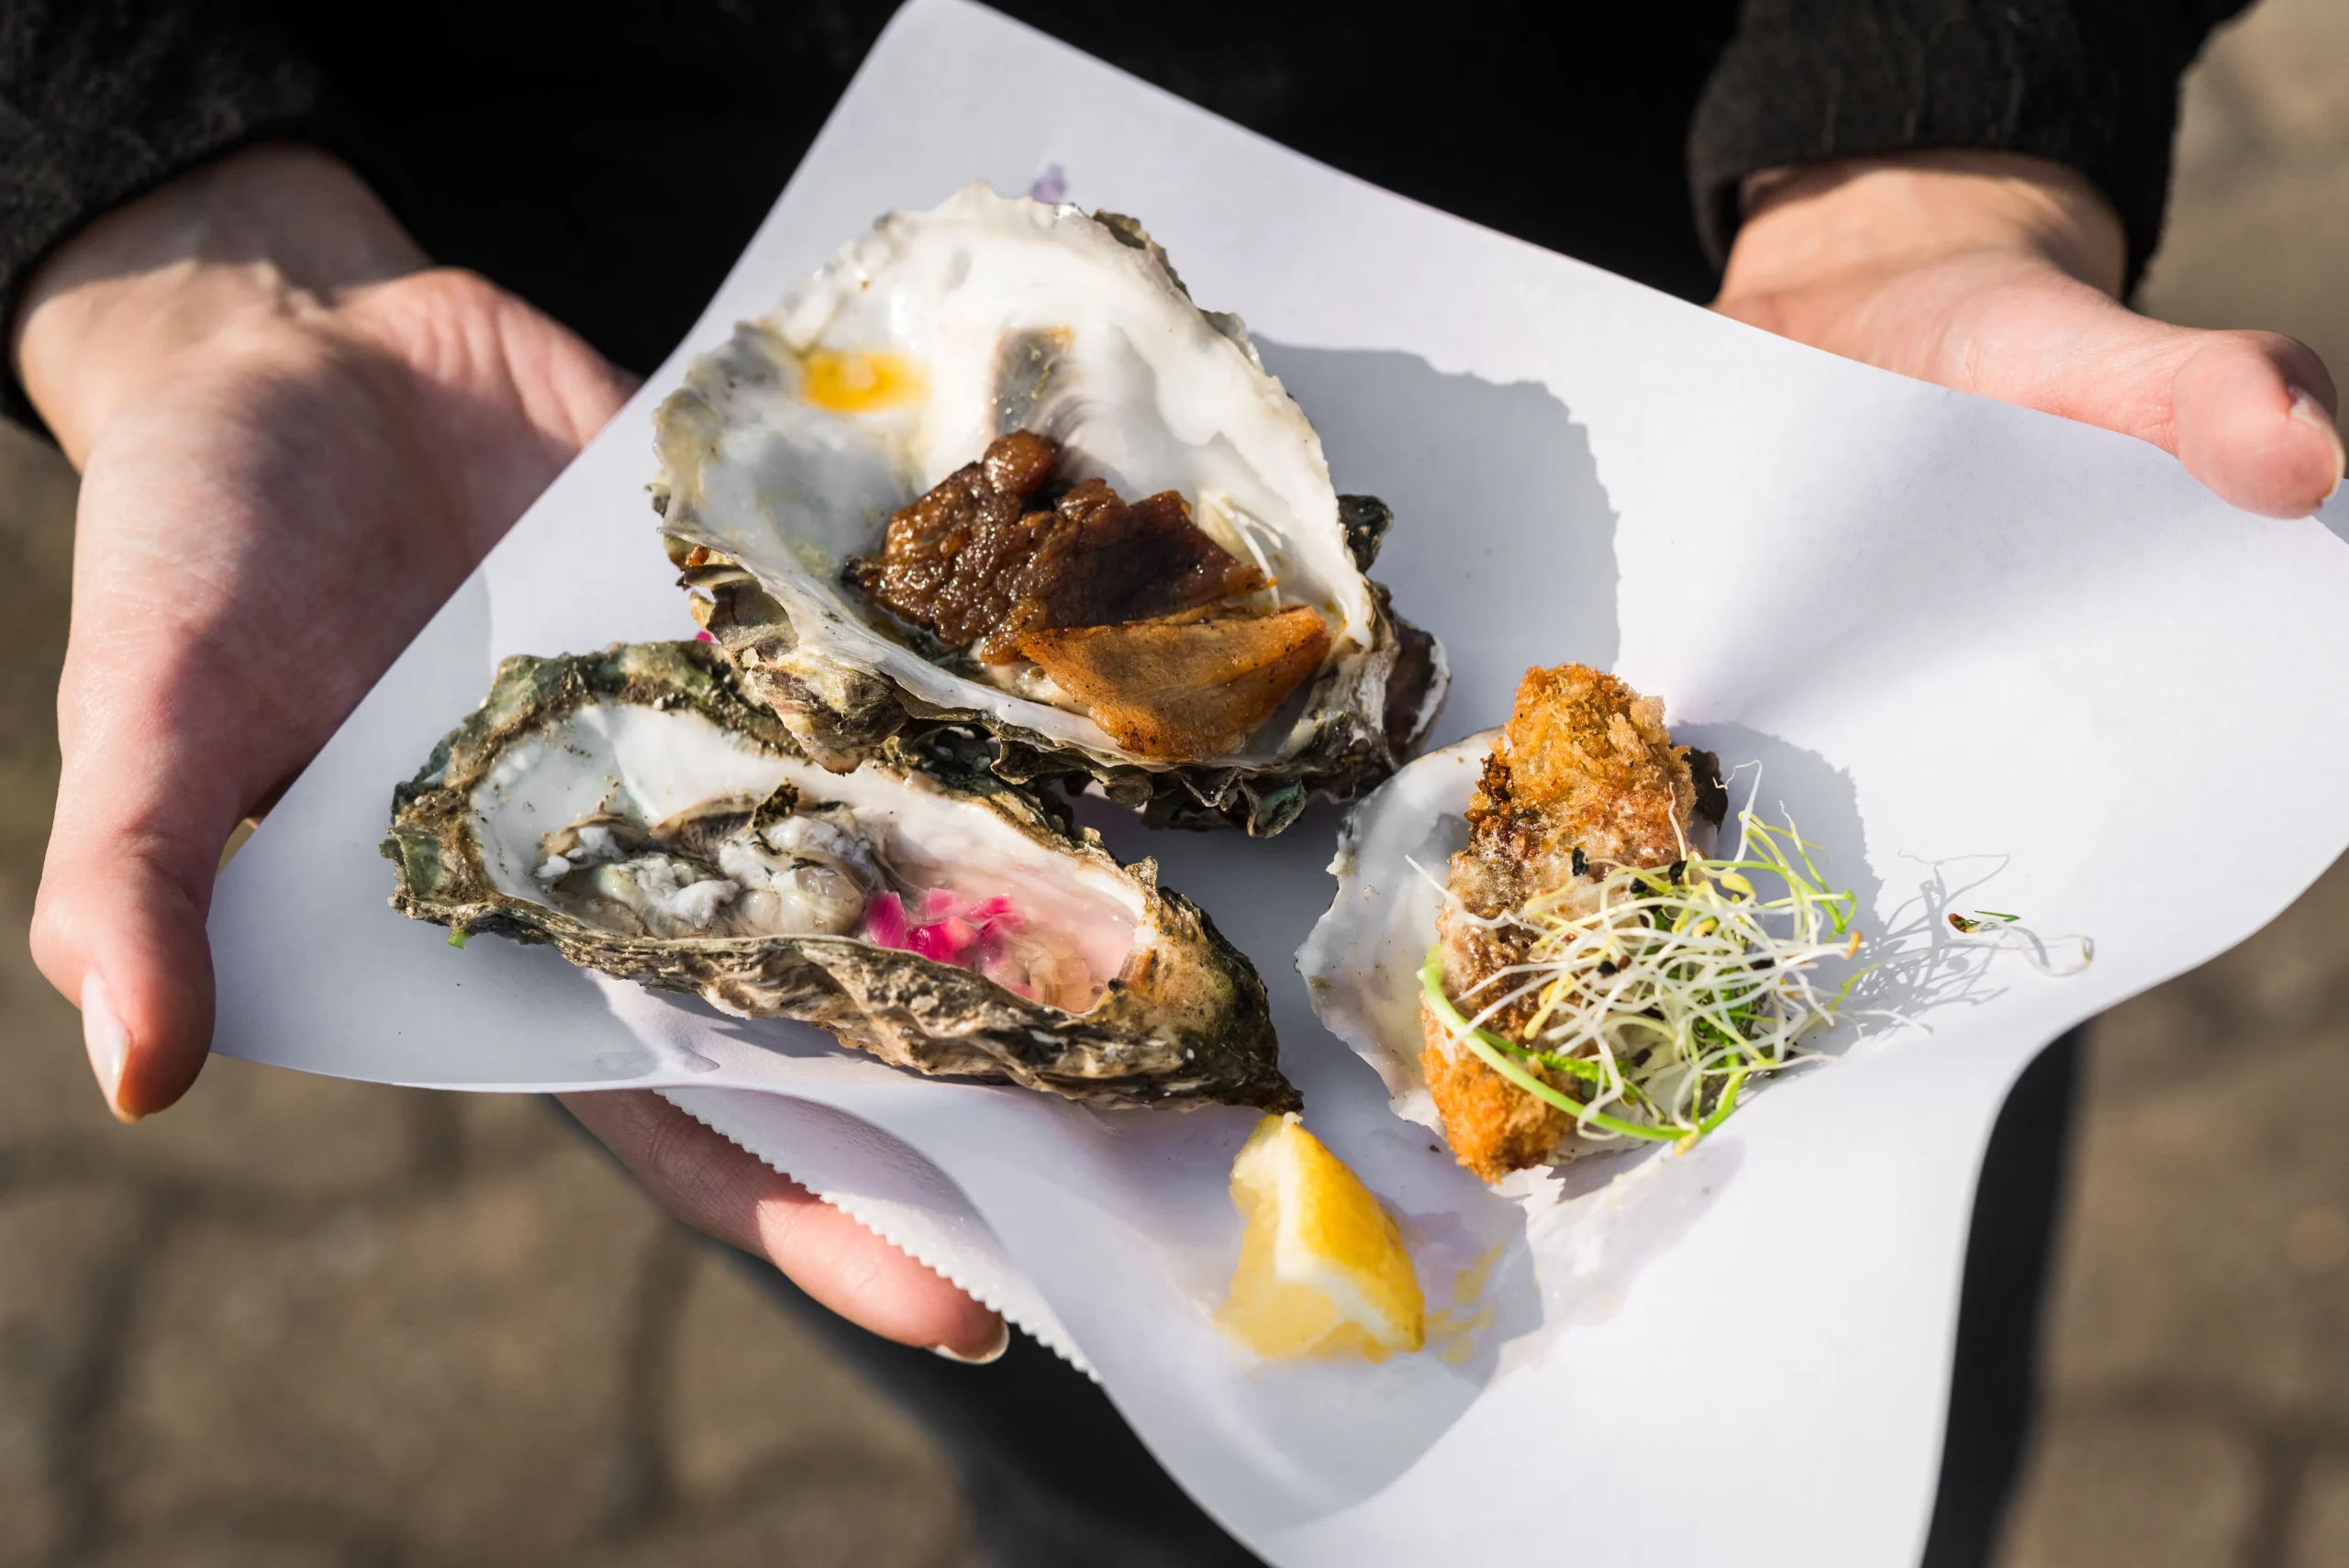 are smoked oysters good for your liver - Can I eat oyster if I have fatty liver